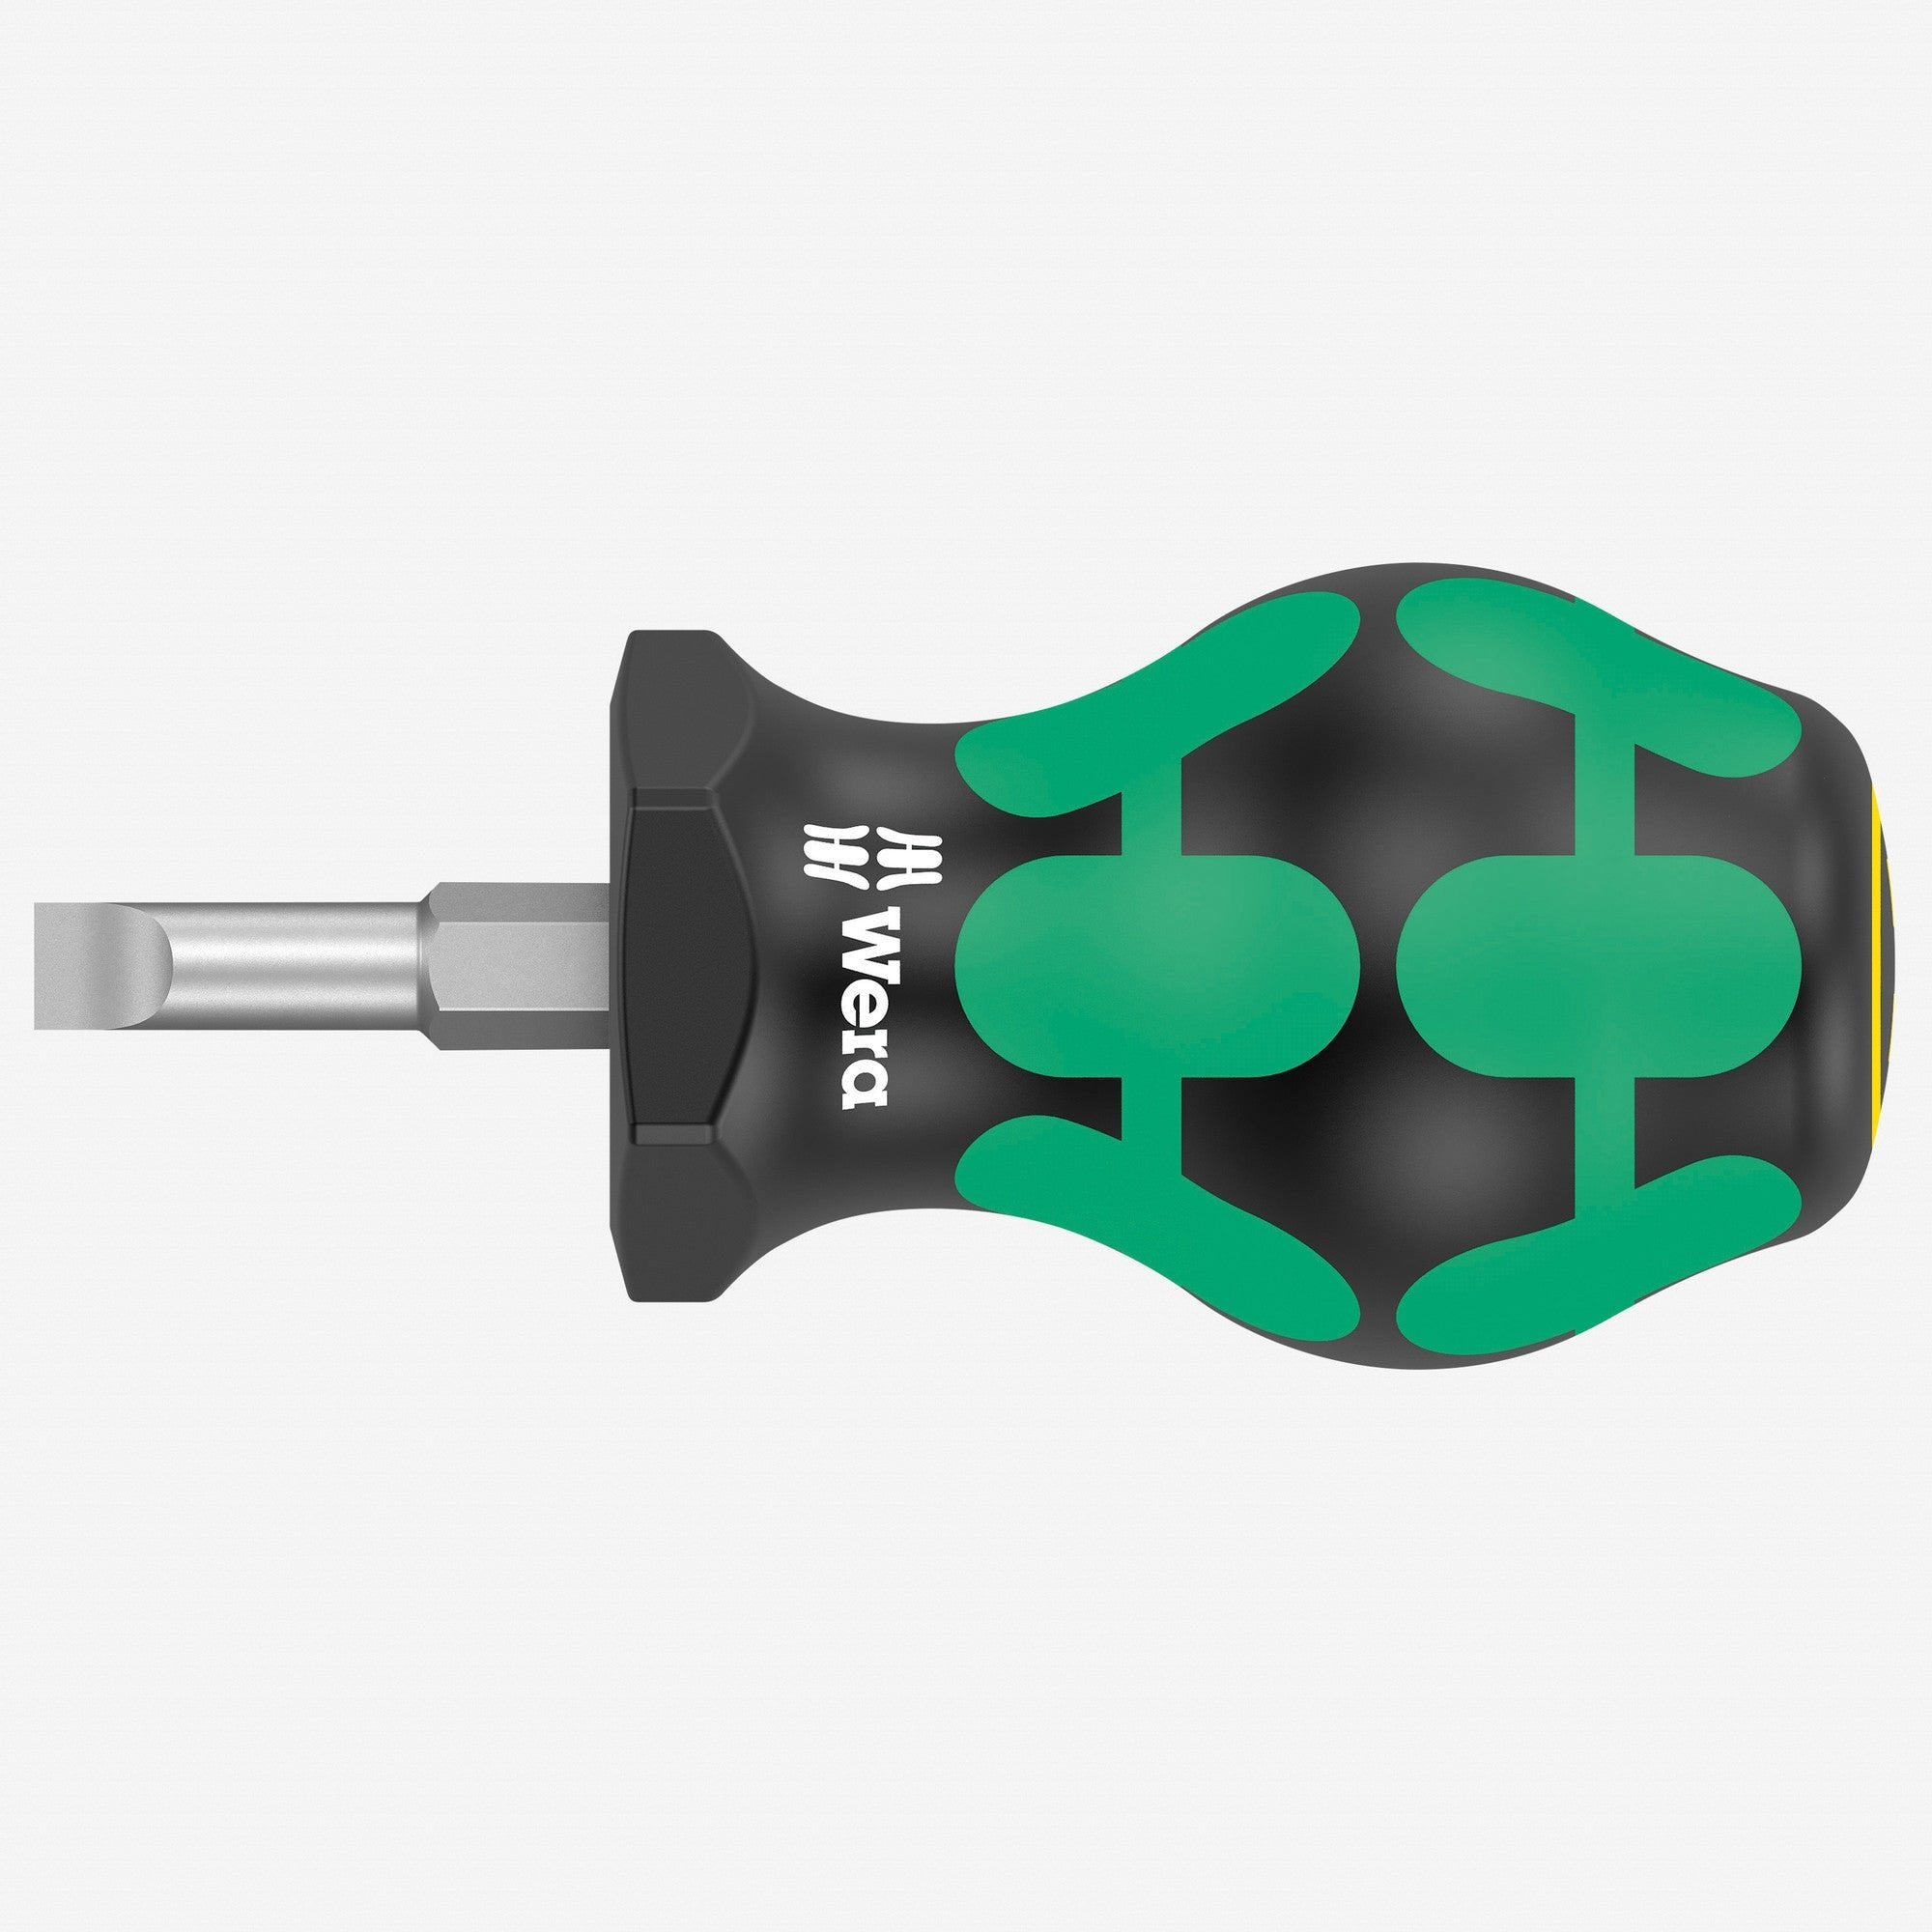 Wera 008843 Stubby 6.5 x 25mm Slotted Screwdriver